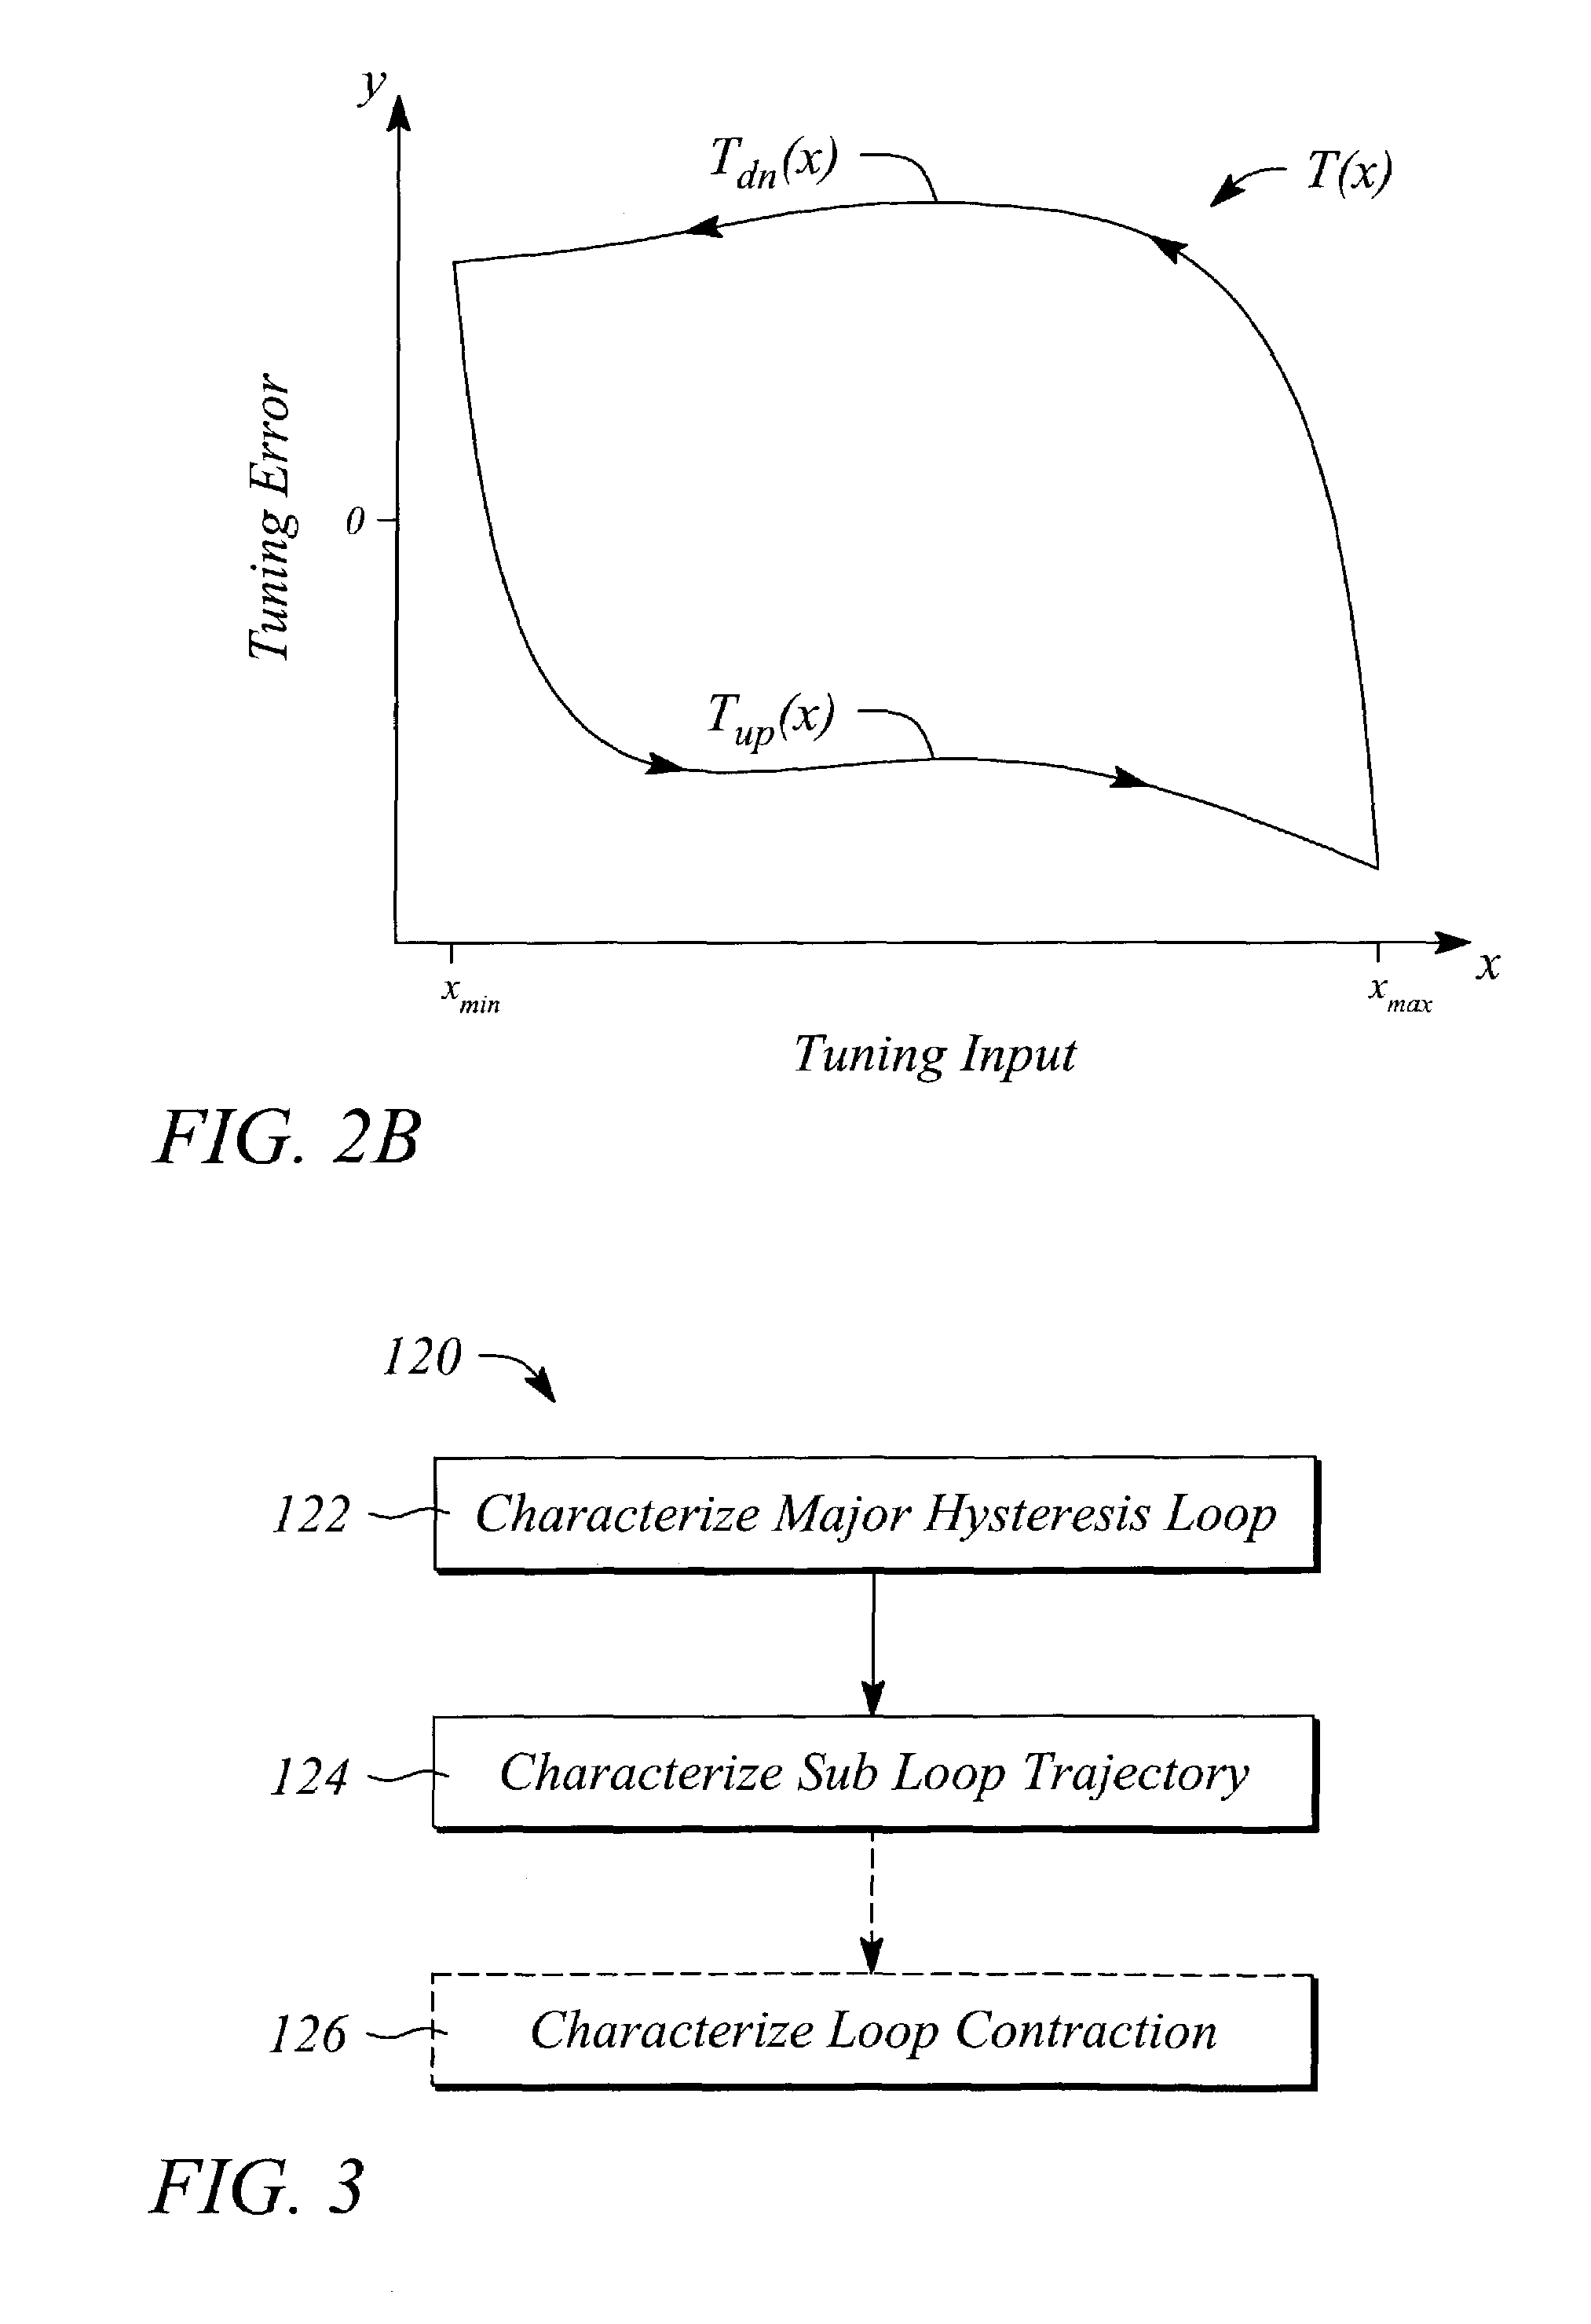 Dynamic model-based compensated tuning of a tunable device